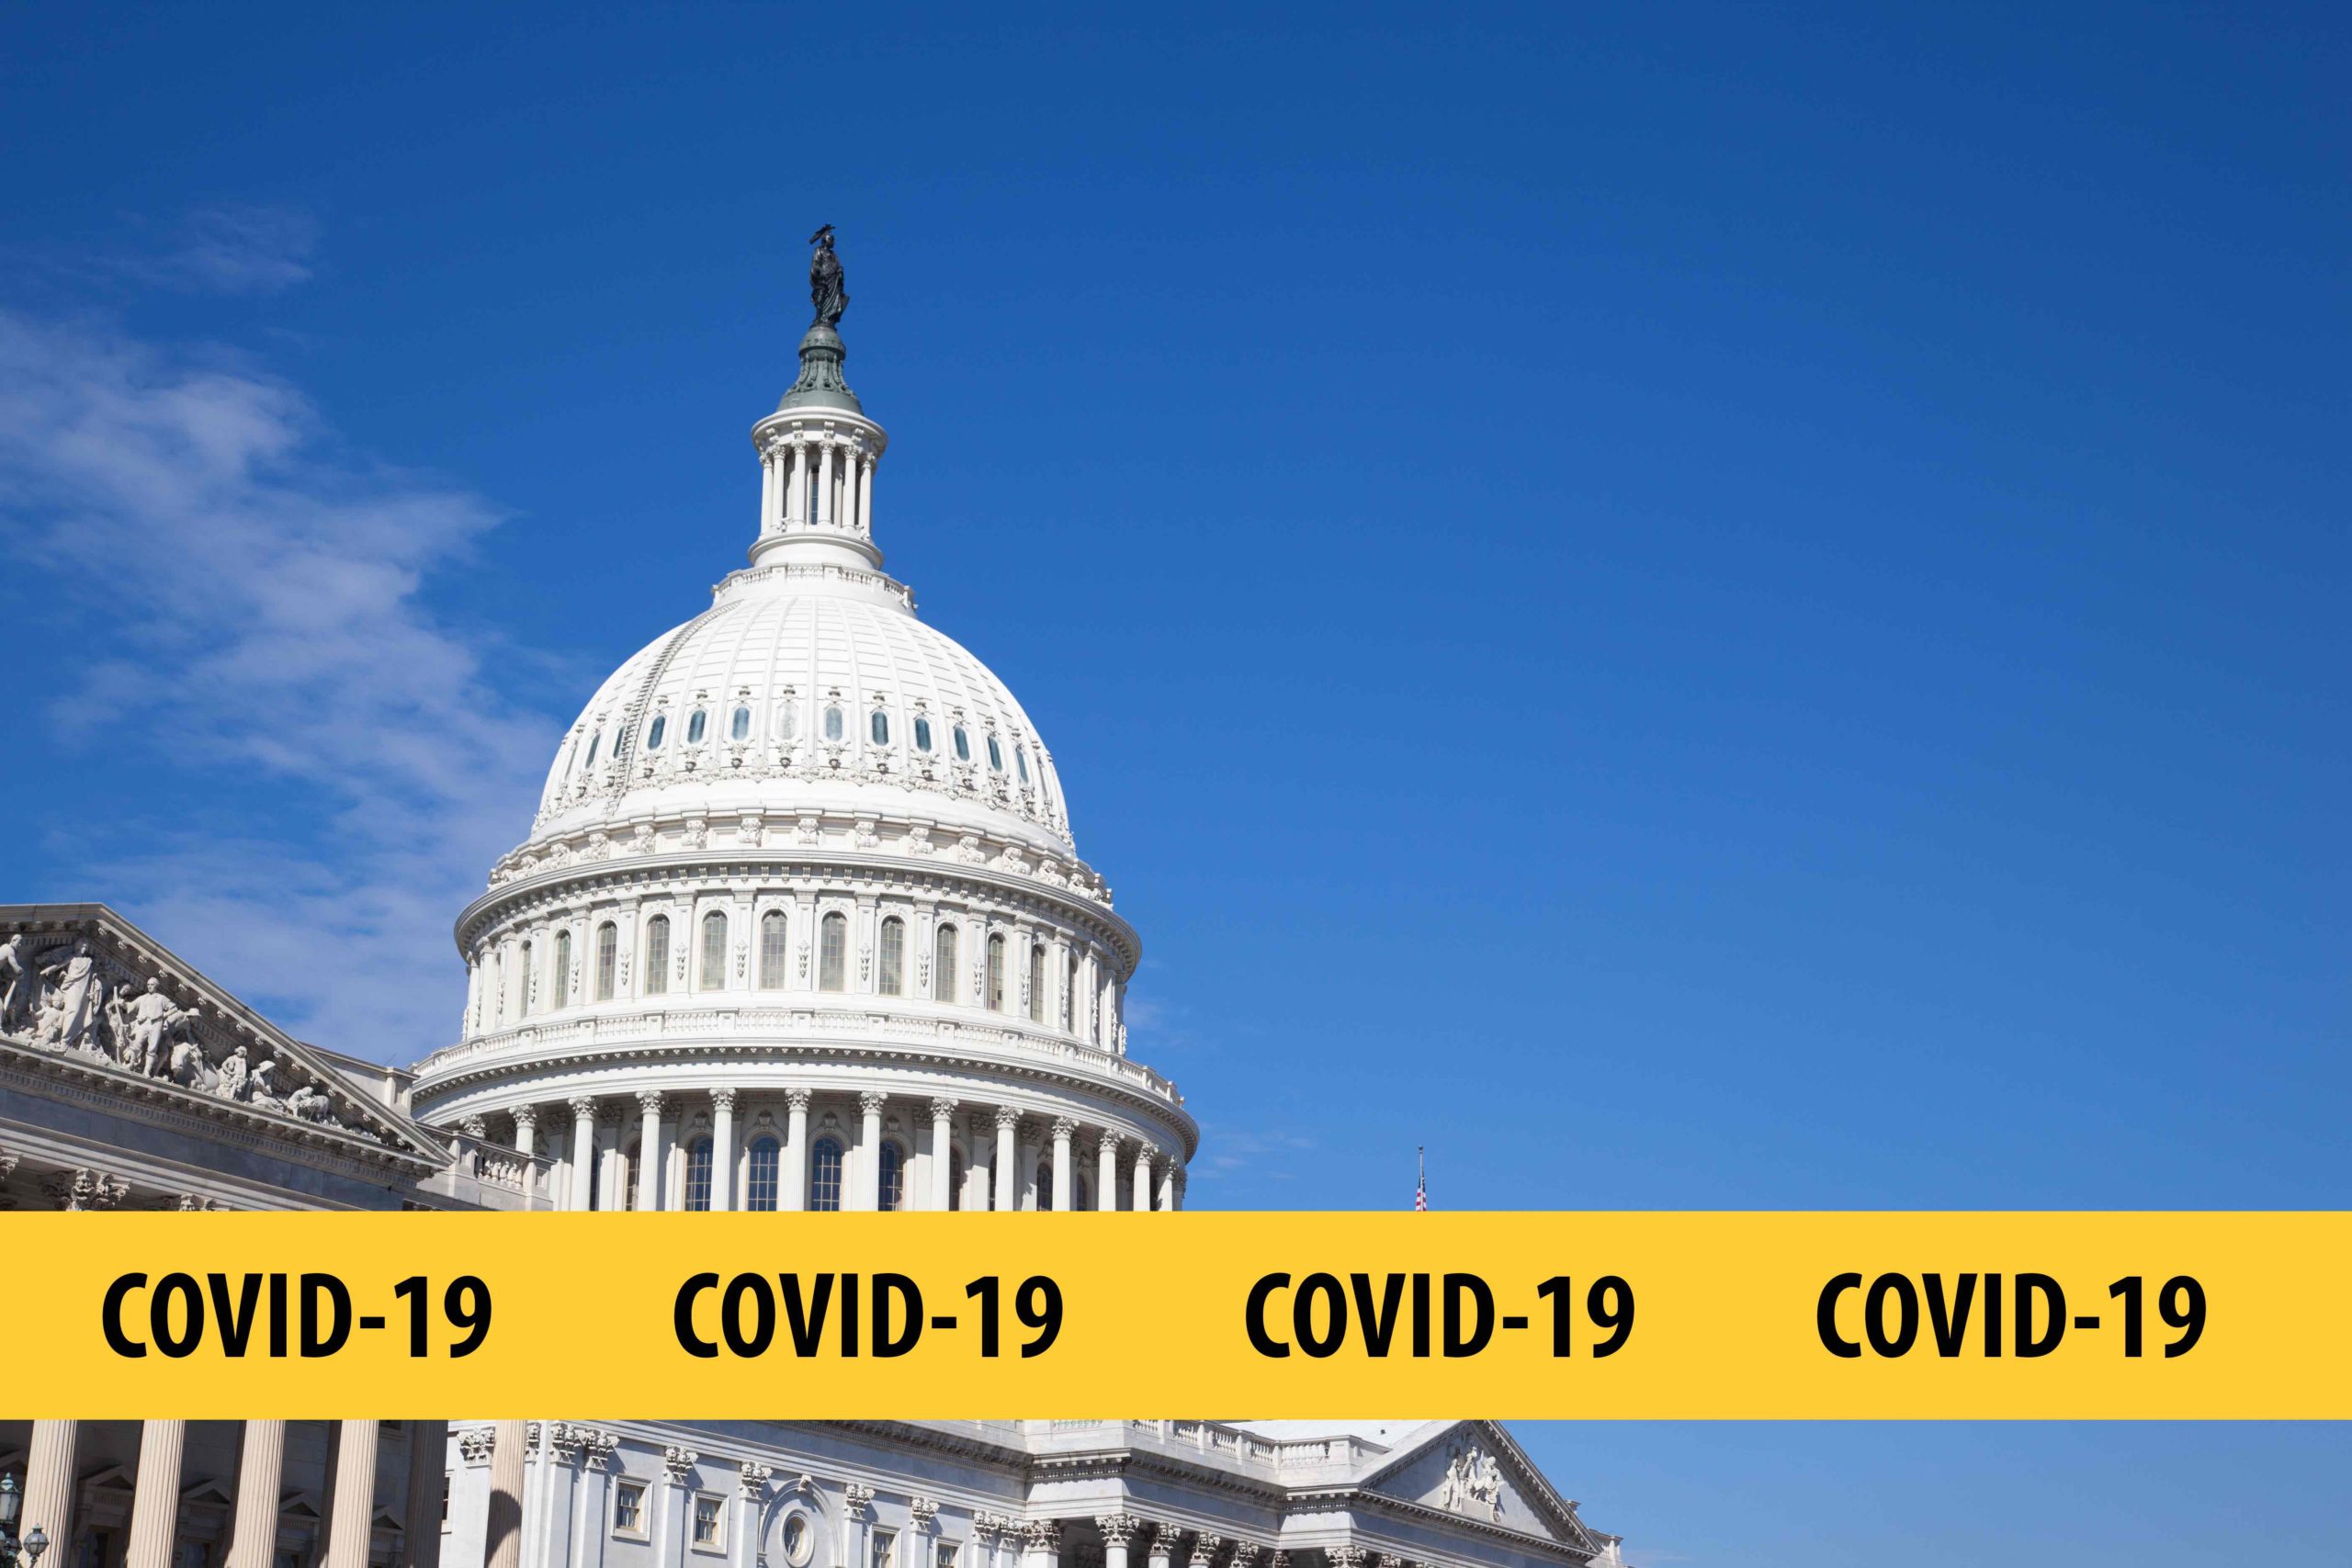 You are currently viewing Coronavirus Federal Regulation as of May 5, 2020